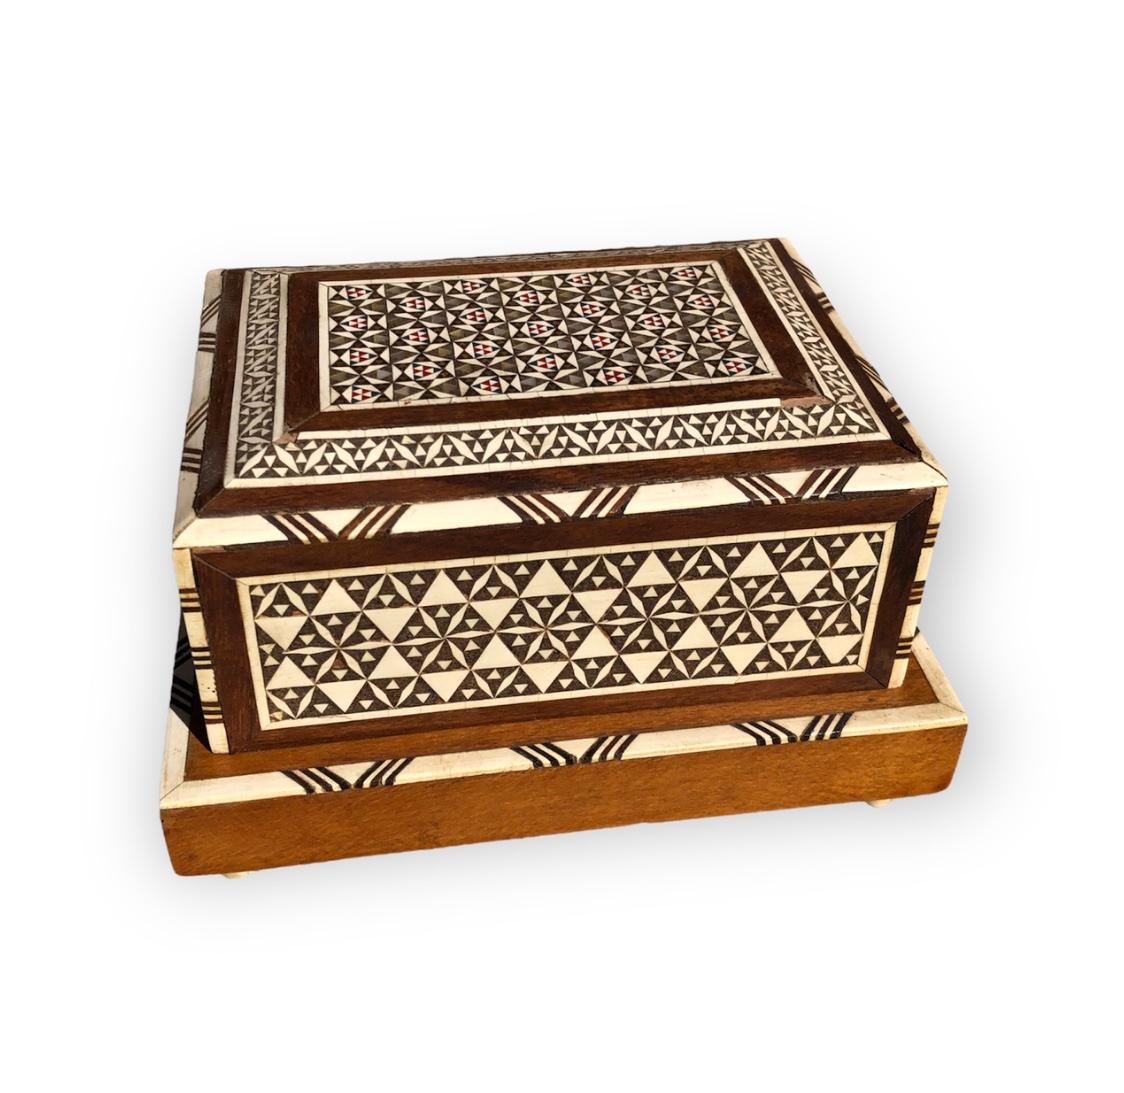 Vintage Moorish Syrian style cigarette music box inlaid with mother of pearl, bone and ebony. Handcrafted very fine Moorish micro mosaic inlaid geometric marquetry artwork. Made in Spain Granada using the Middle Eastern work. These boxes are used to